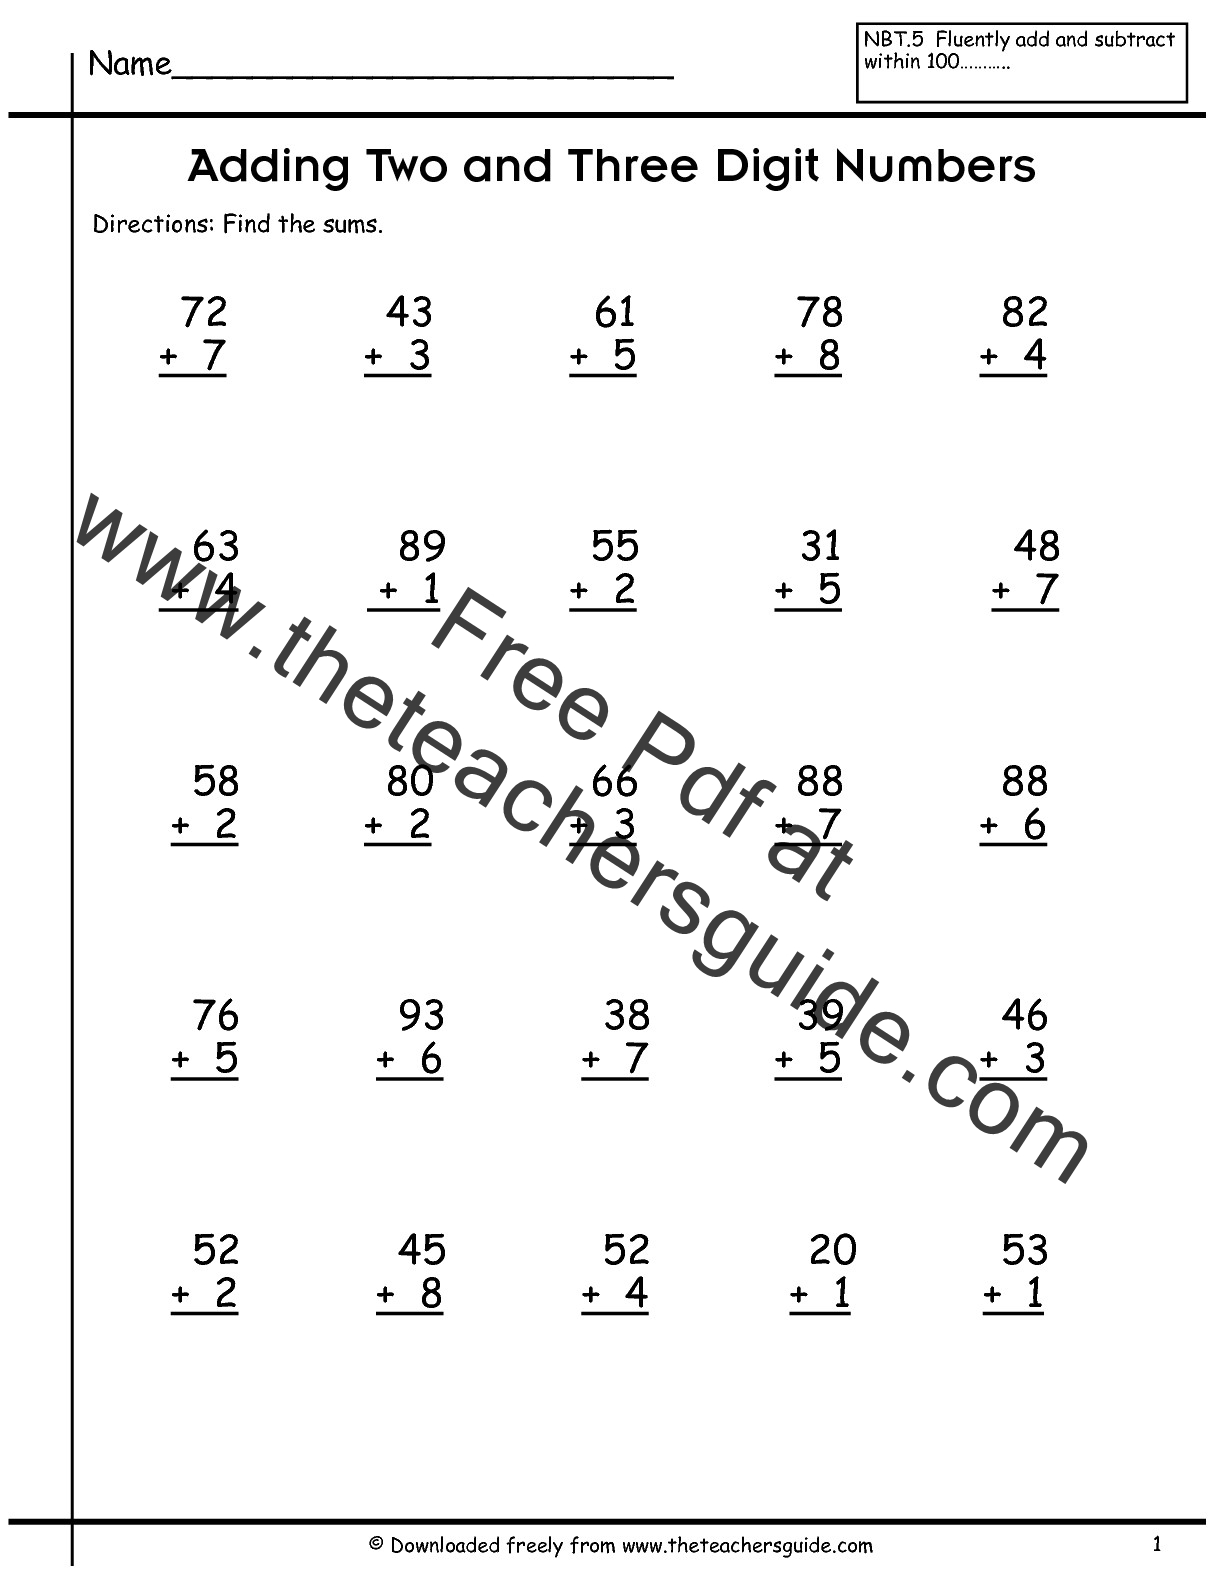 adding-two-two-digit-numbers-without-regrouping-worksheet-turtle-diary